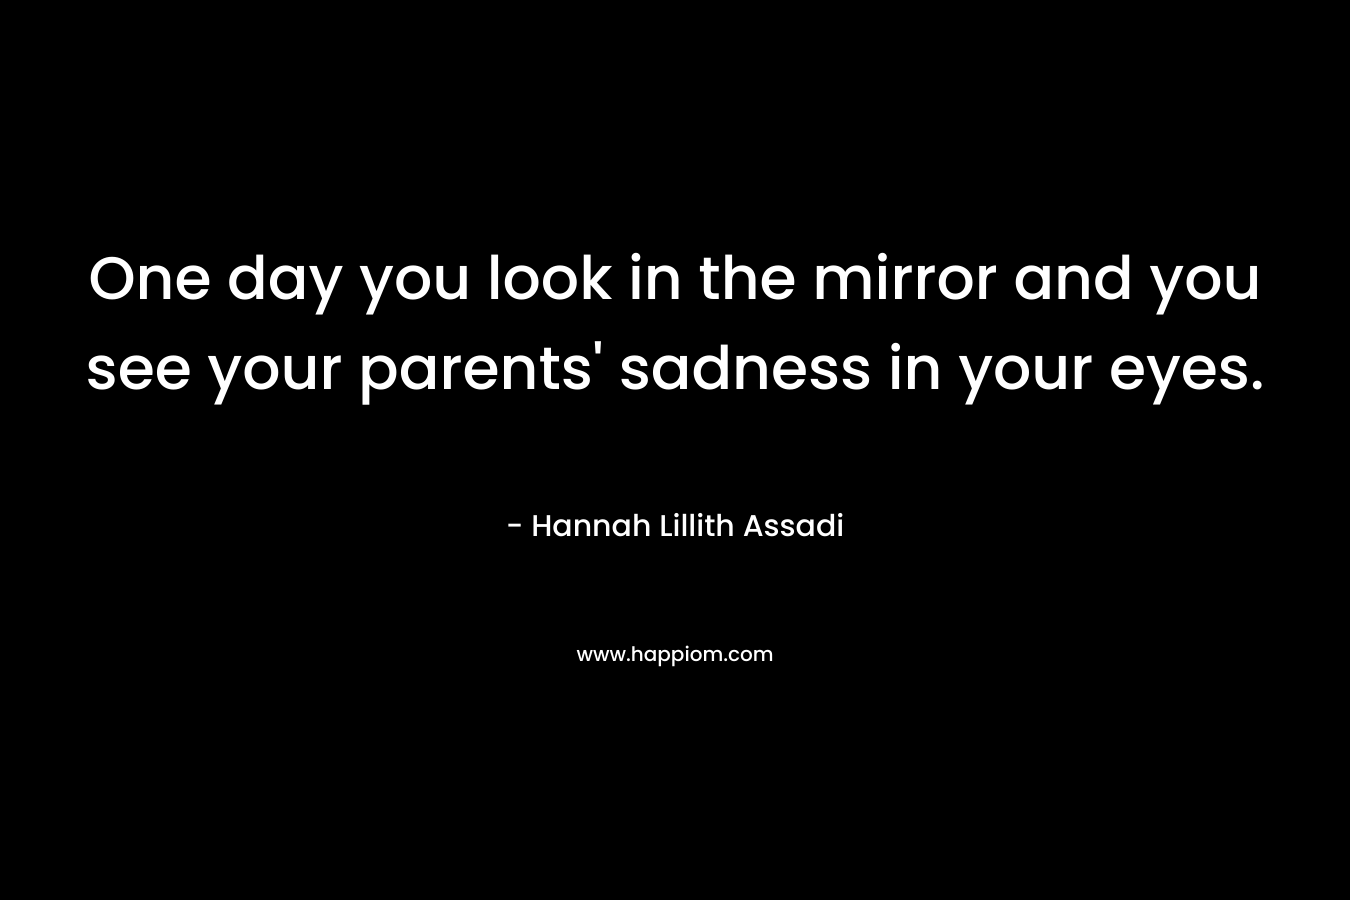 One day you look in the mirror and you see your parents' sadness in your eyes.